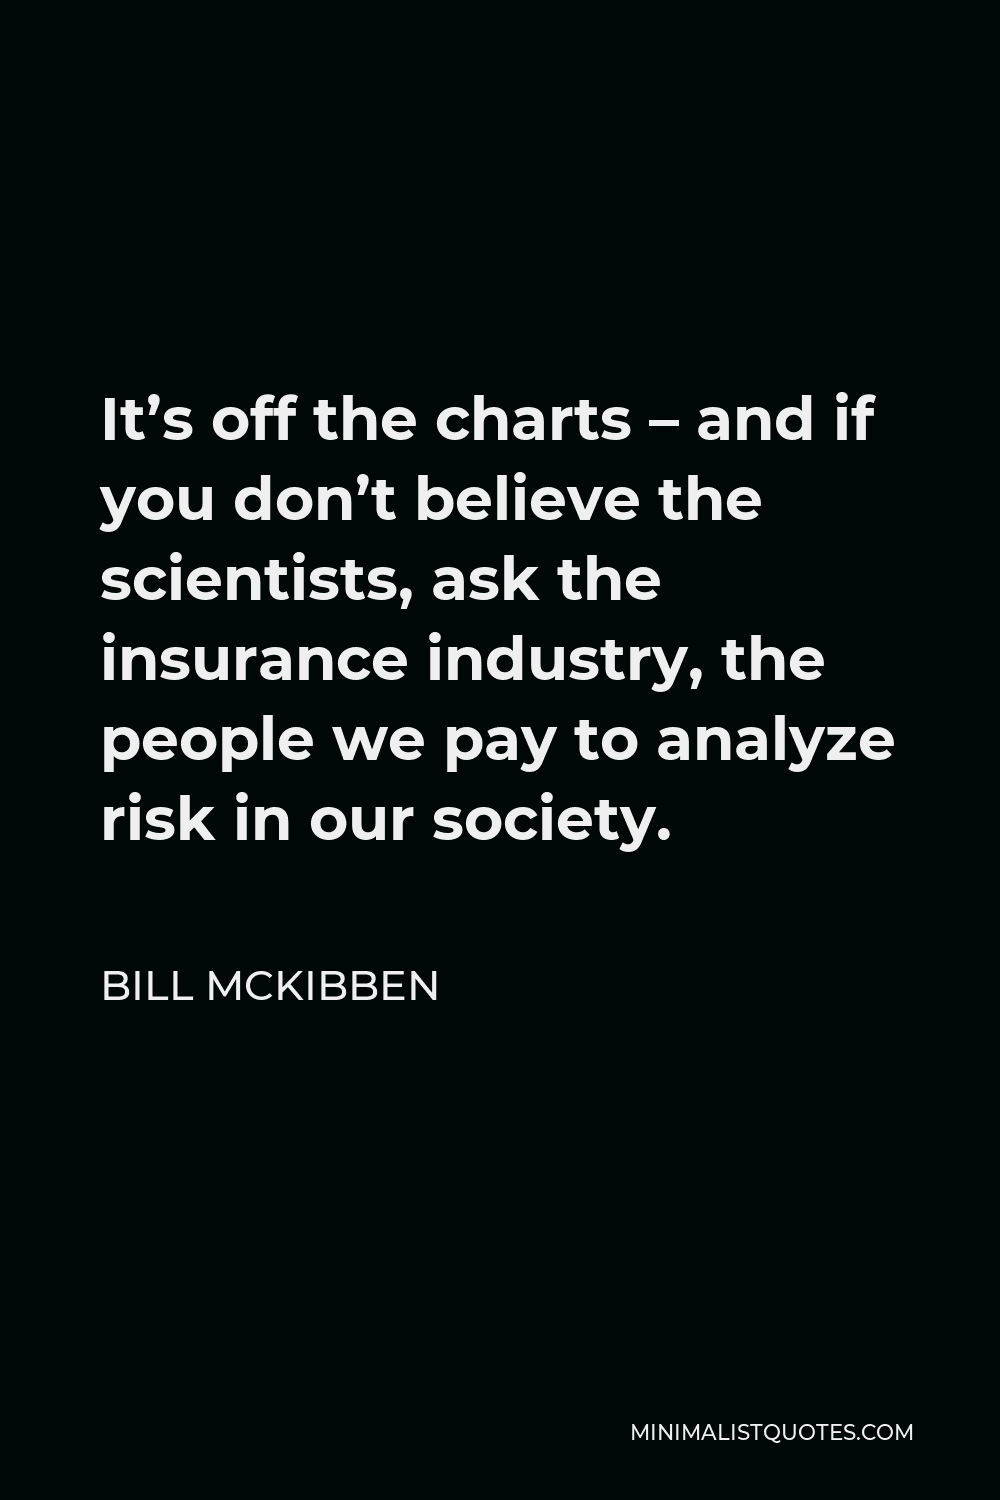 Bill McKibben Quote - It’s off the charts – and if you don’t believe the scientists, ask the insurance industry, the people we pay to analyze risk in our society.